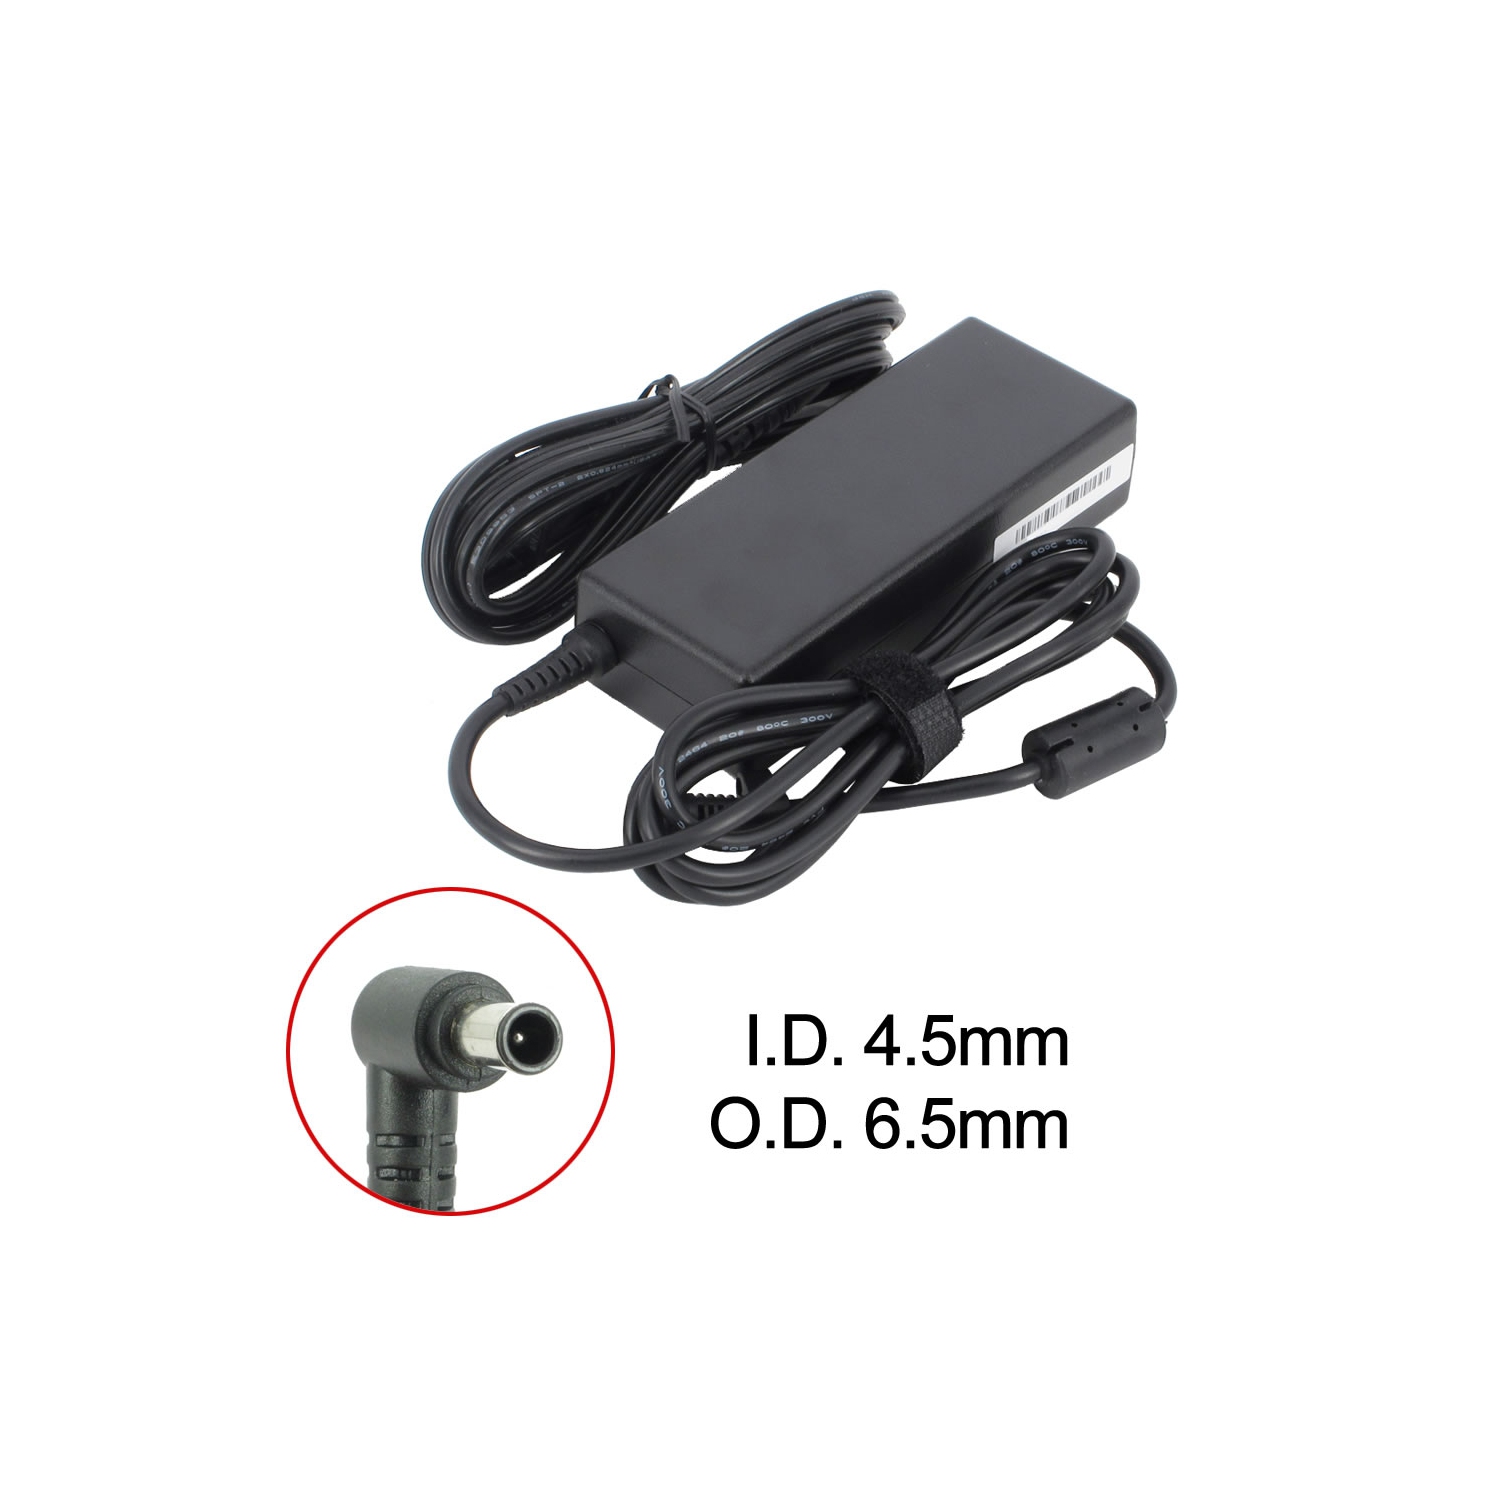 Brand New Laptop AC Adapter for Sony VAIO PCG-FX880, PCGA-AC19V1, PCGA-AC19V23, VGP-AC19V19, VGP-AC19V27, VGP-AC19V48